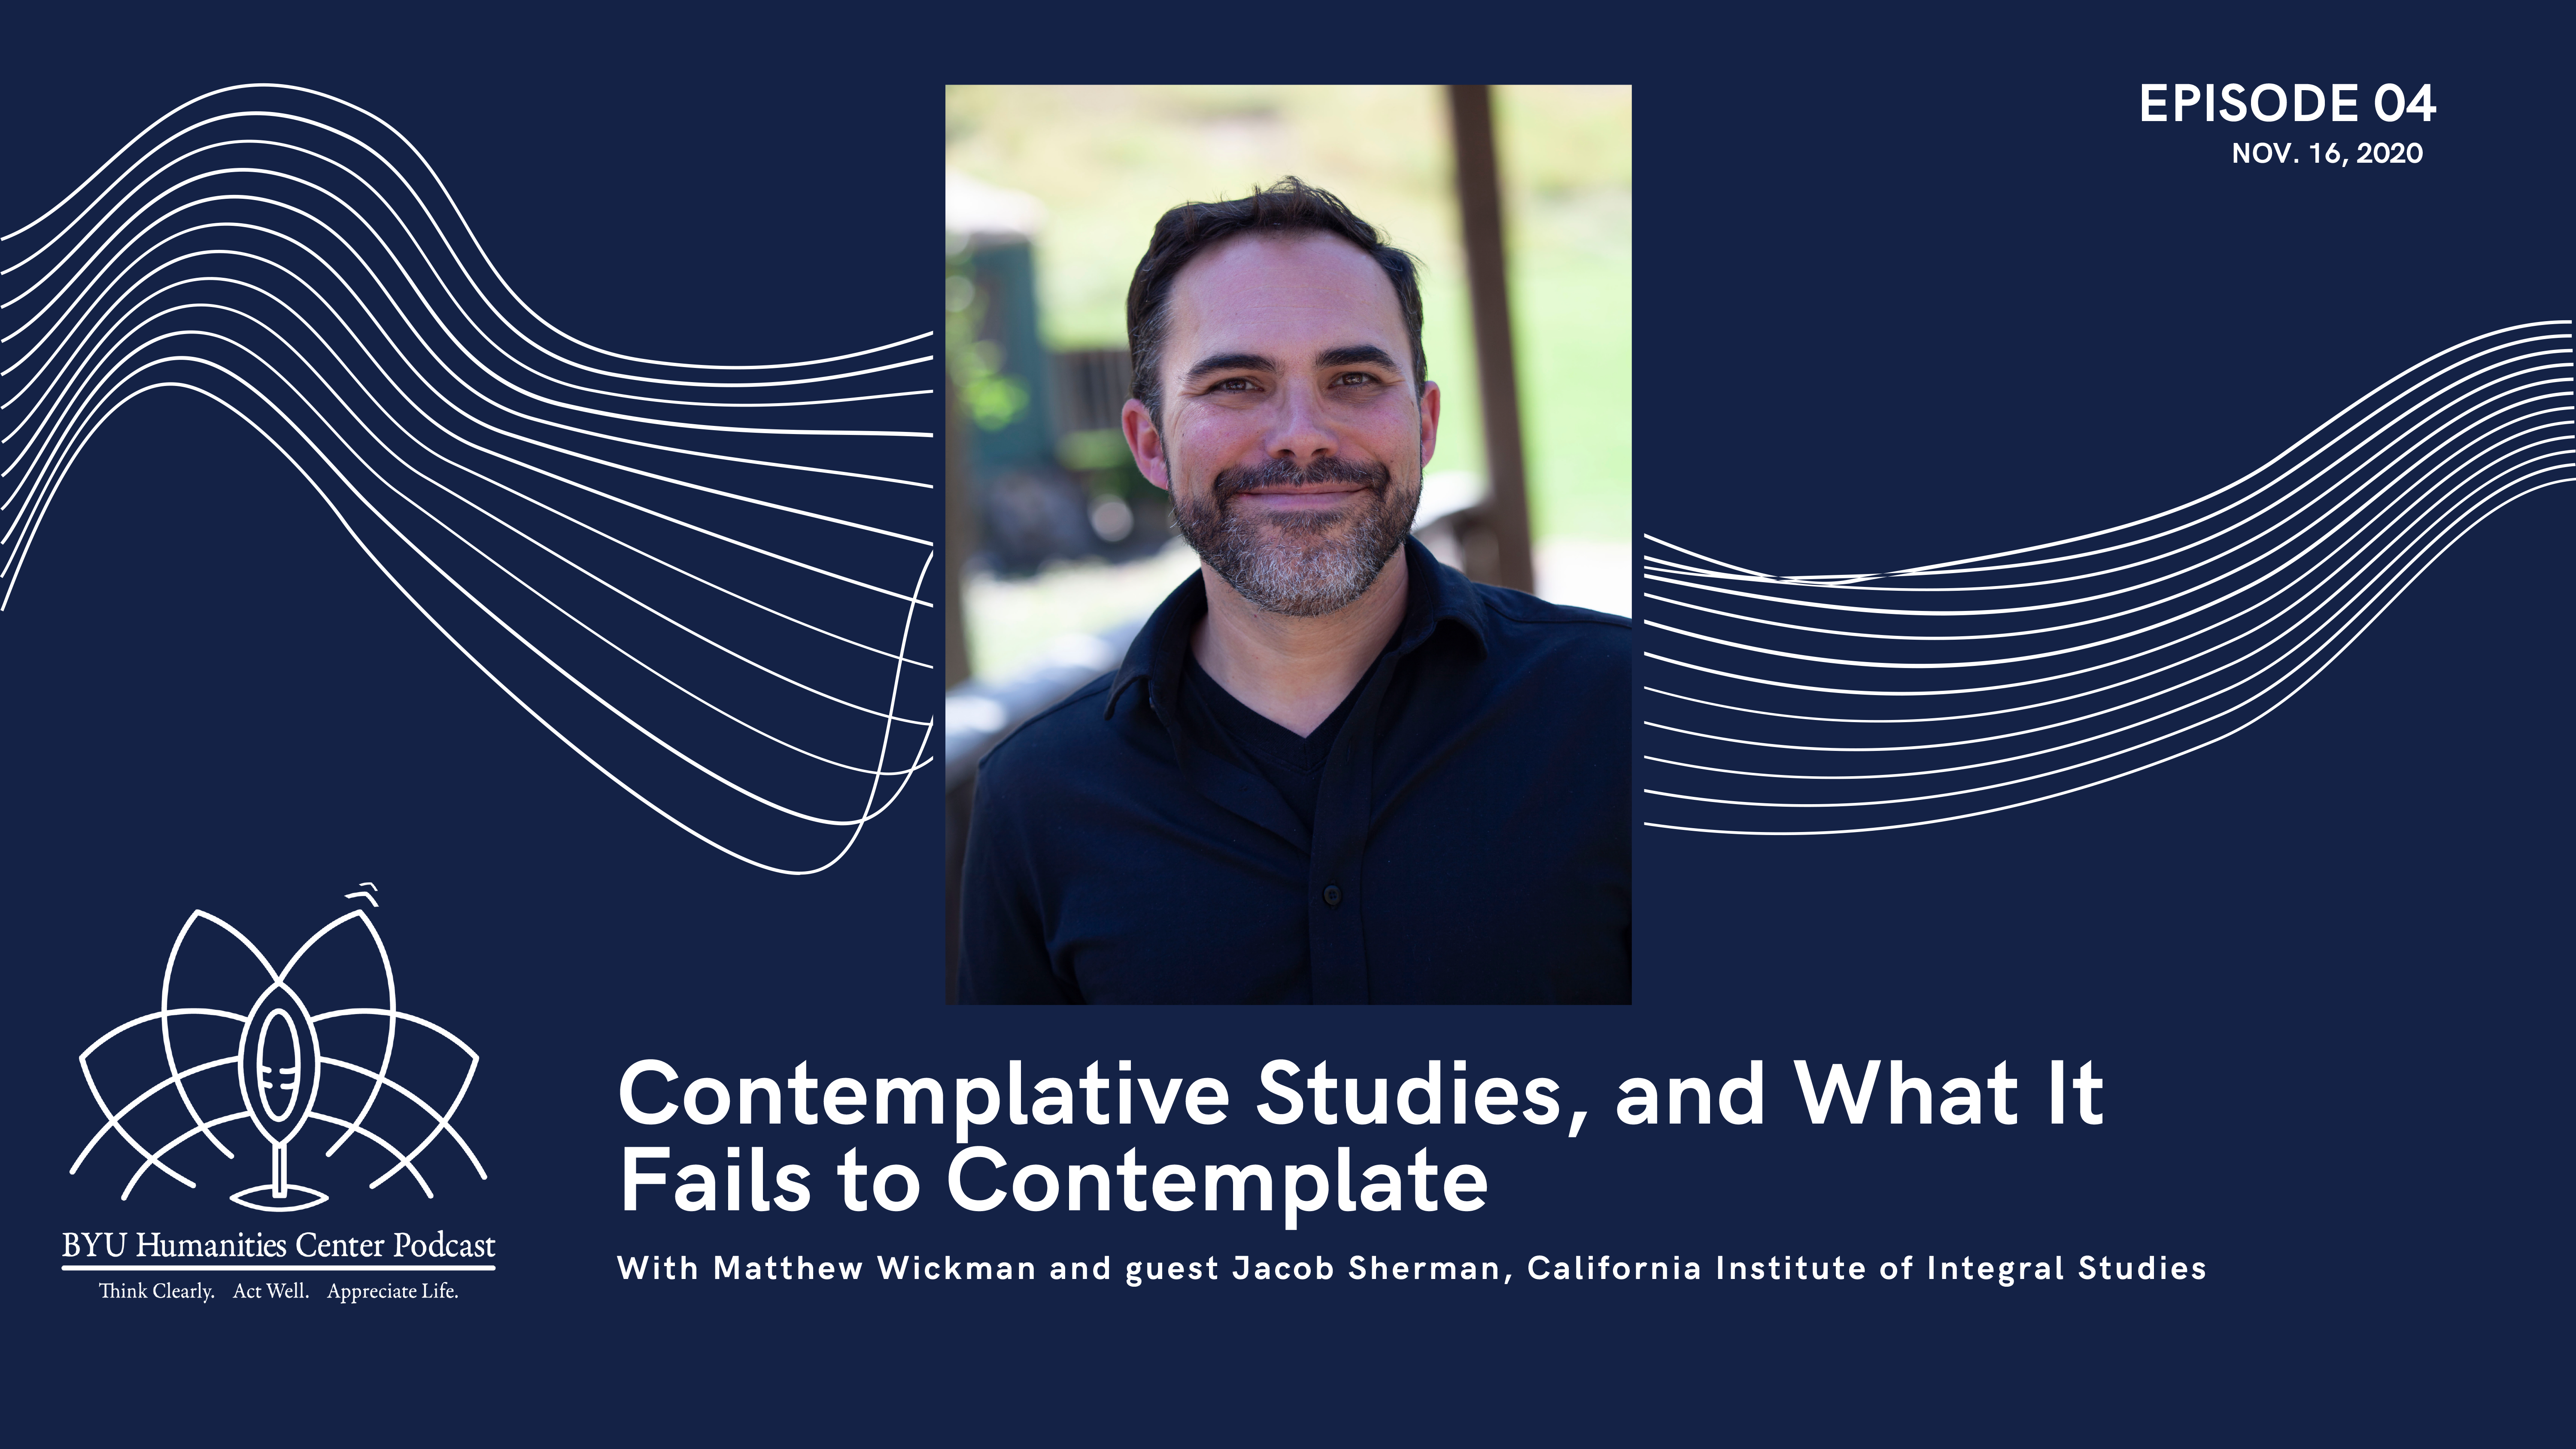 Contemplative Studies, and What it Fails to Contemplate, with guest Jacob Sherman, California Institute of Integral Studies